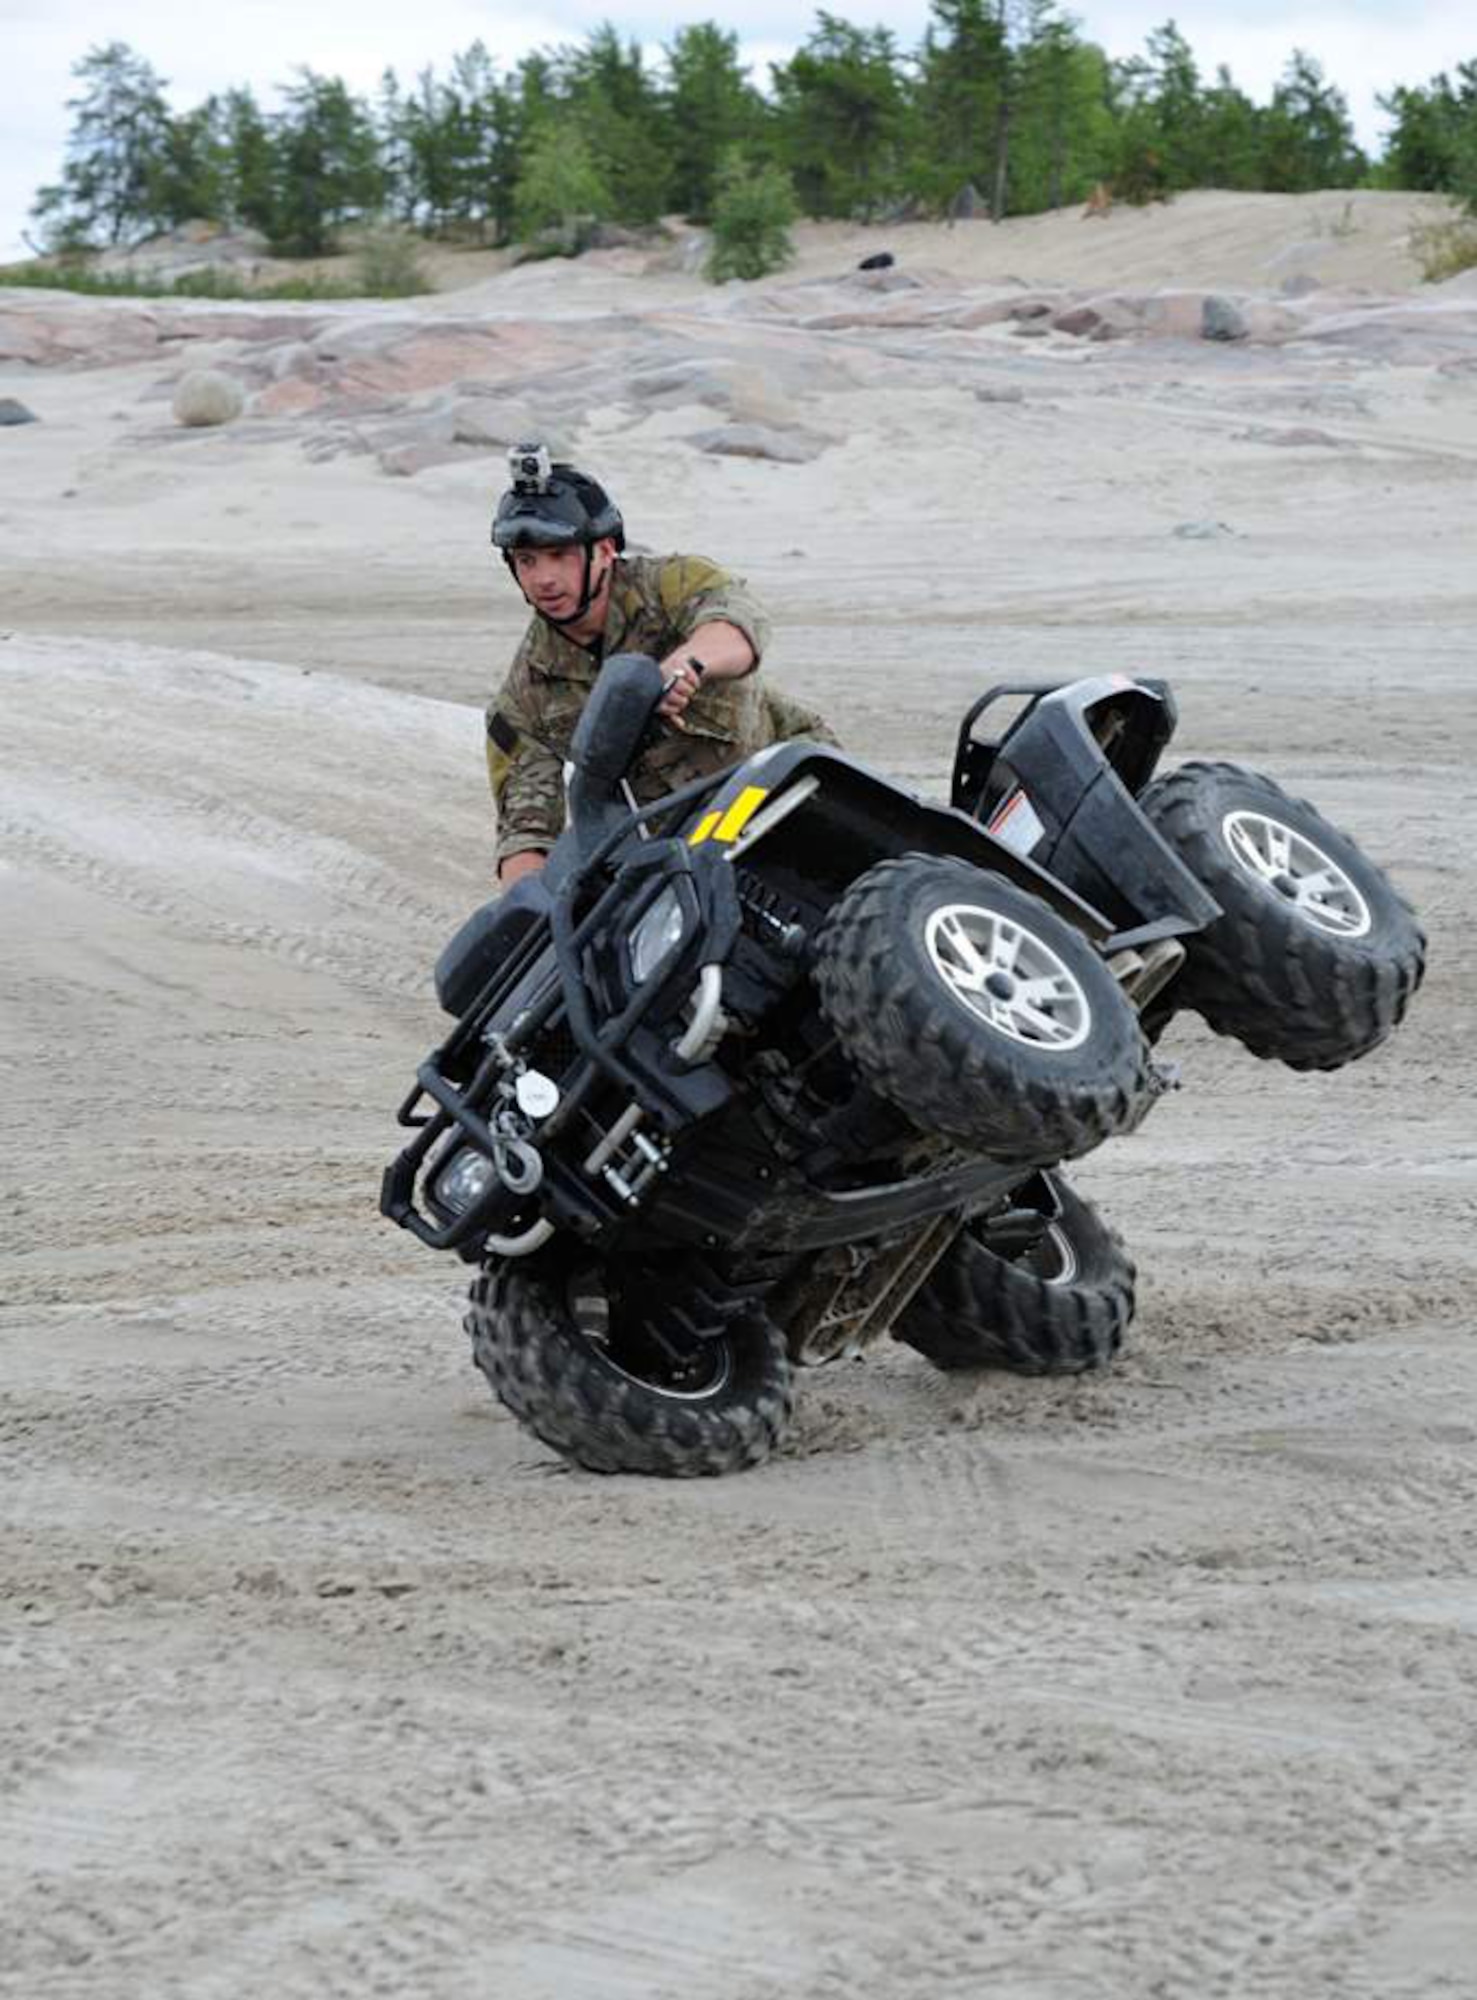 Capt. Jim Sluder, a combat rescue officer with the 308th Rescue Squadron, rides an all-terrain vehicle as in Yellowknife, Canada, as part of a search-and-rescue exercise with Canadian search-and-rescue technicians. Members of the 308th RQS, part of the 920th Rescue Wing at Patrick Air Force Base, Fla., train with Canadian SAR Techs three times per year.